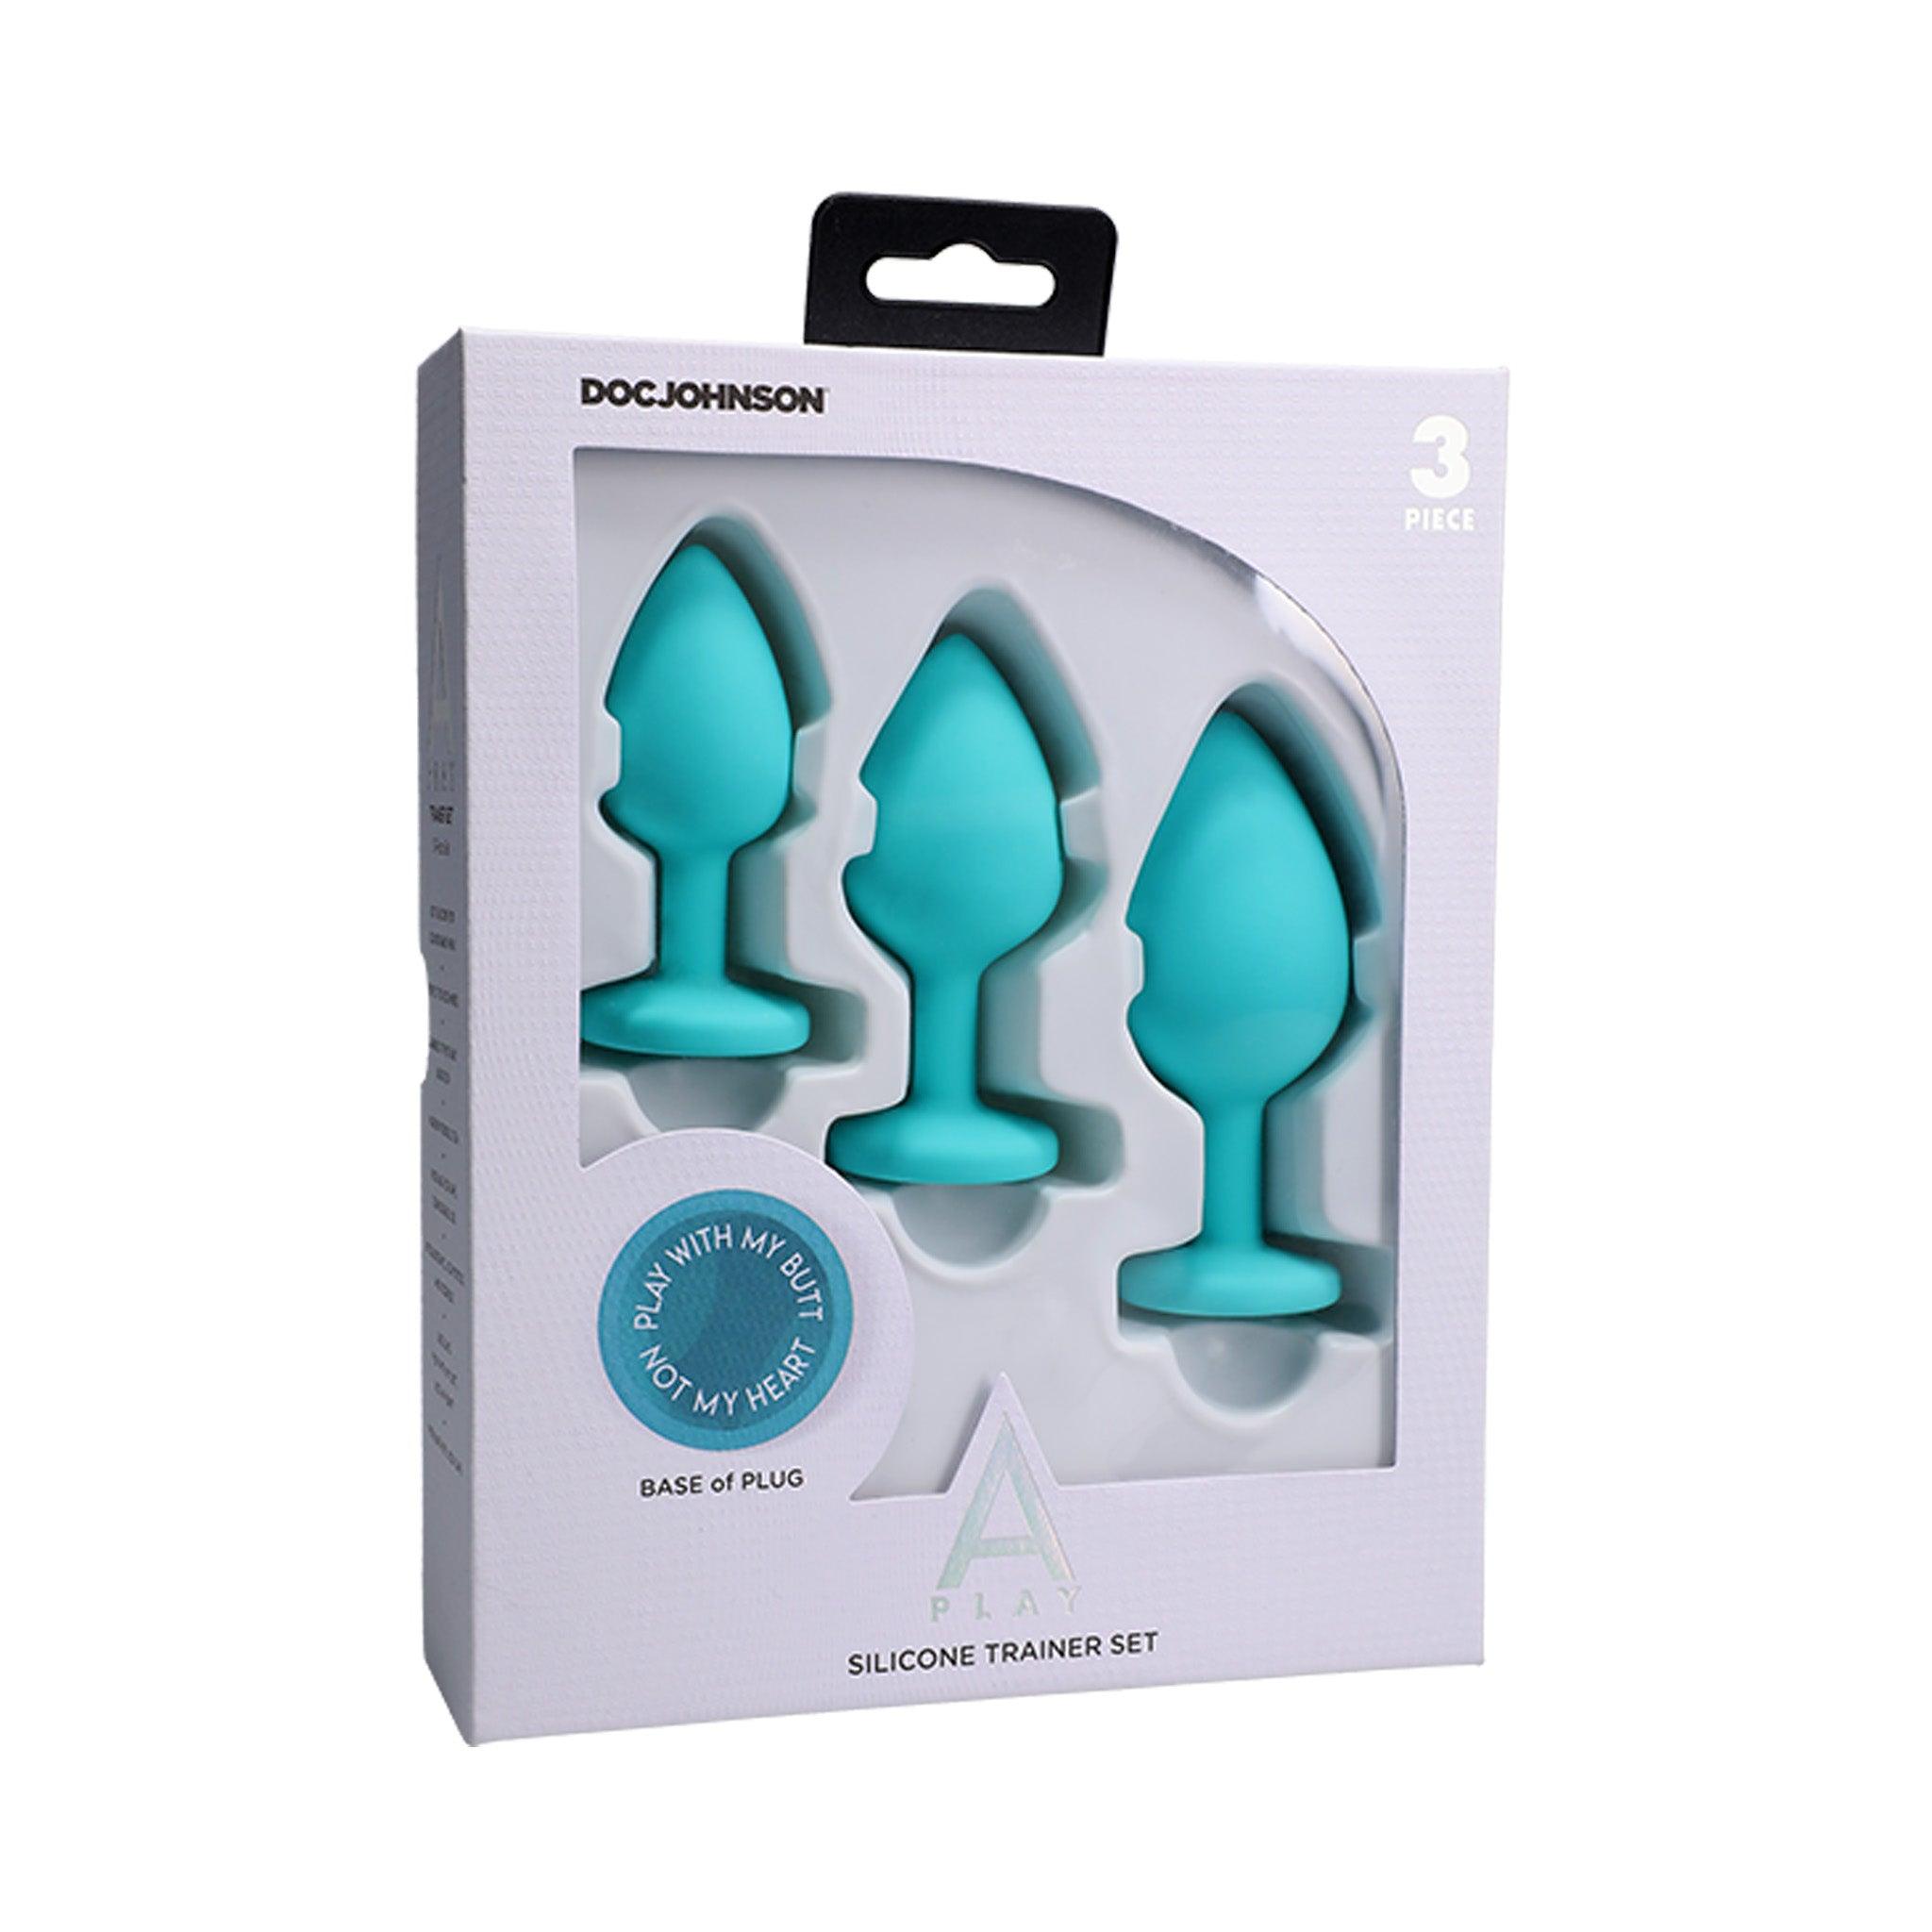 A-Play - Silicone Trainer Set 3 Piece Set - Teal - CheapLubes.com